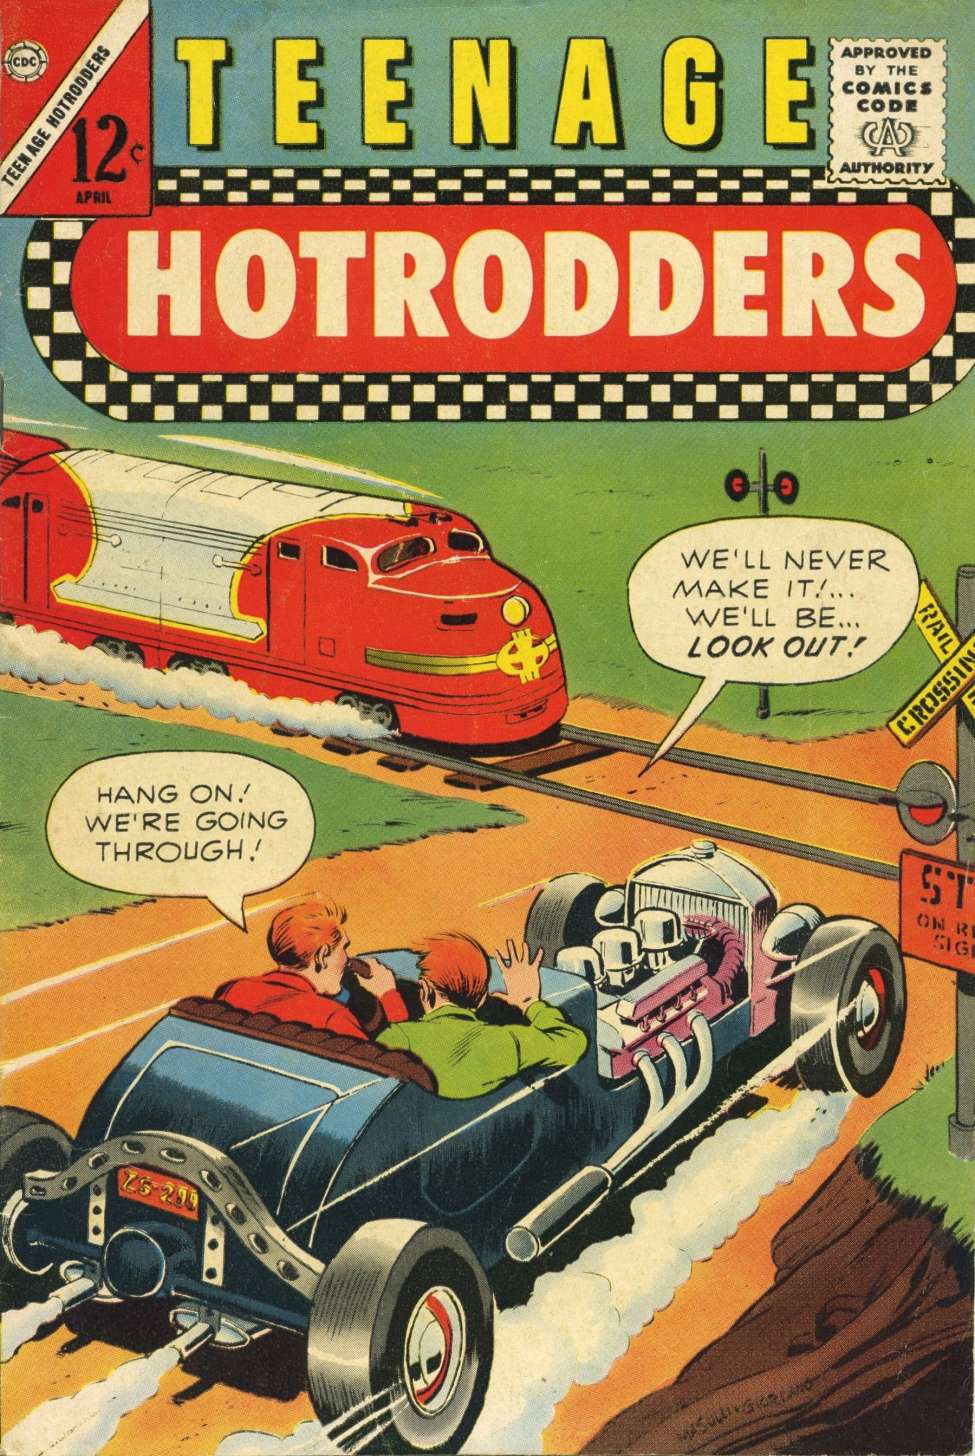 Book Cover For Teenage Hotrodders 1